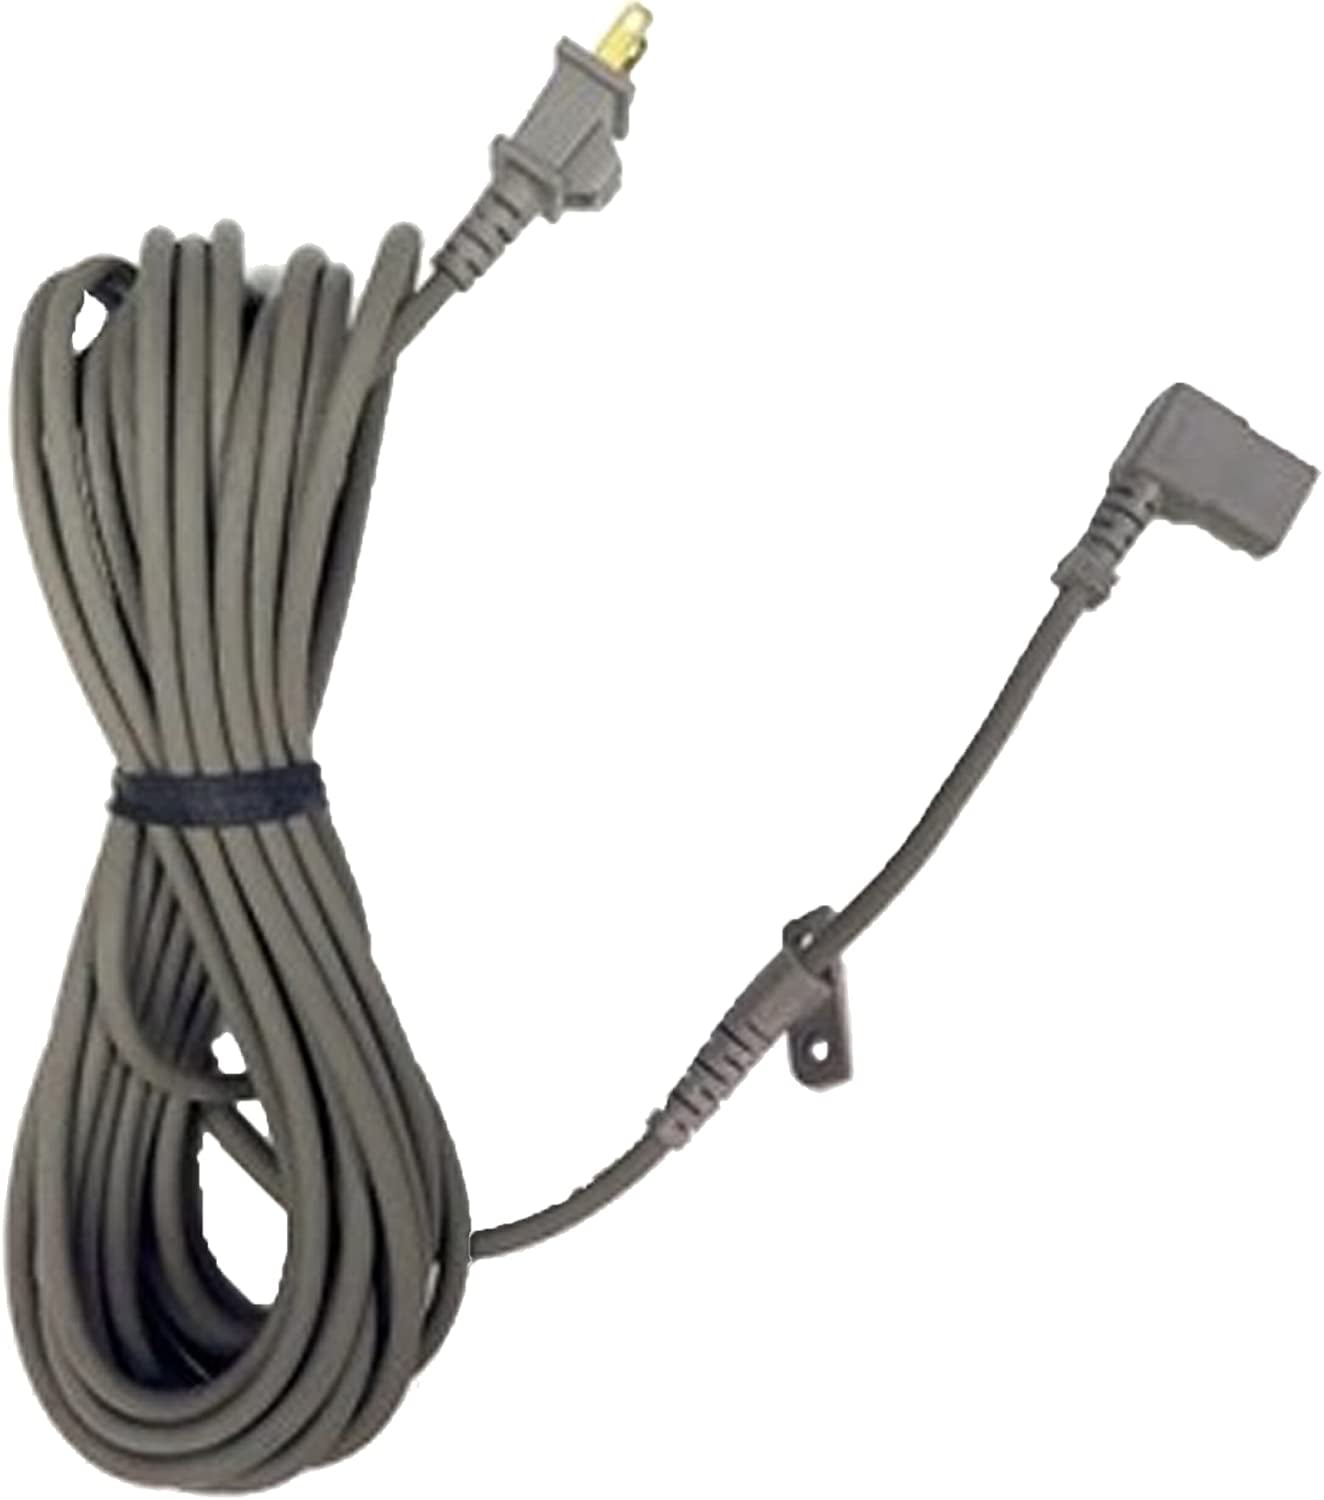 Suitable for Sentria models Grey Kirby Mains Power Lead New 